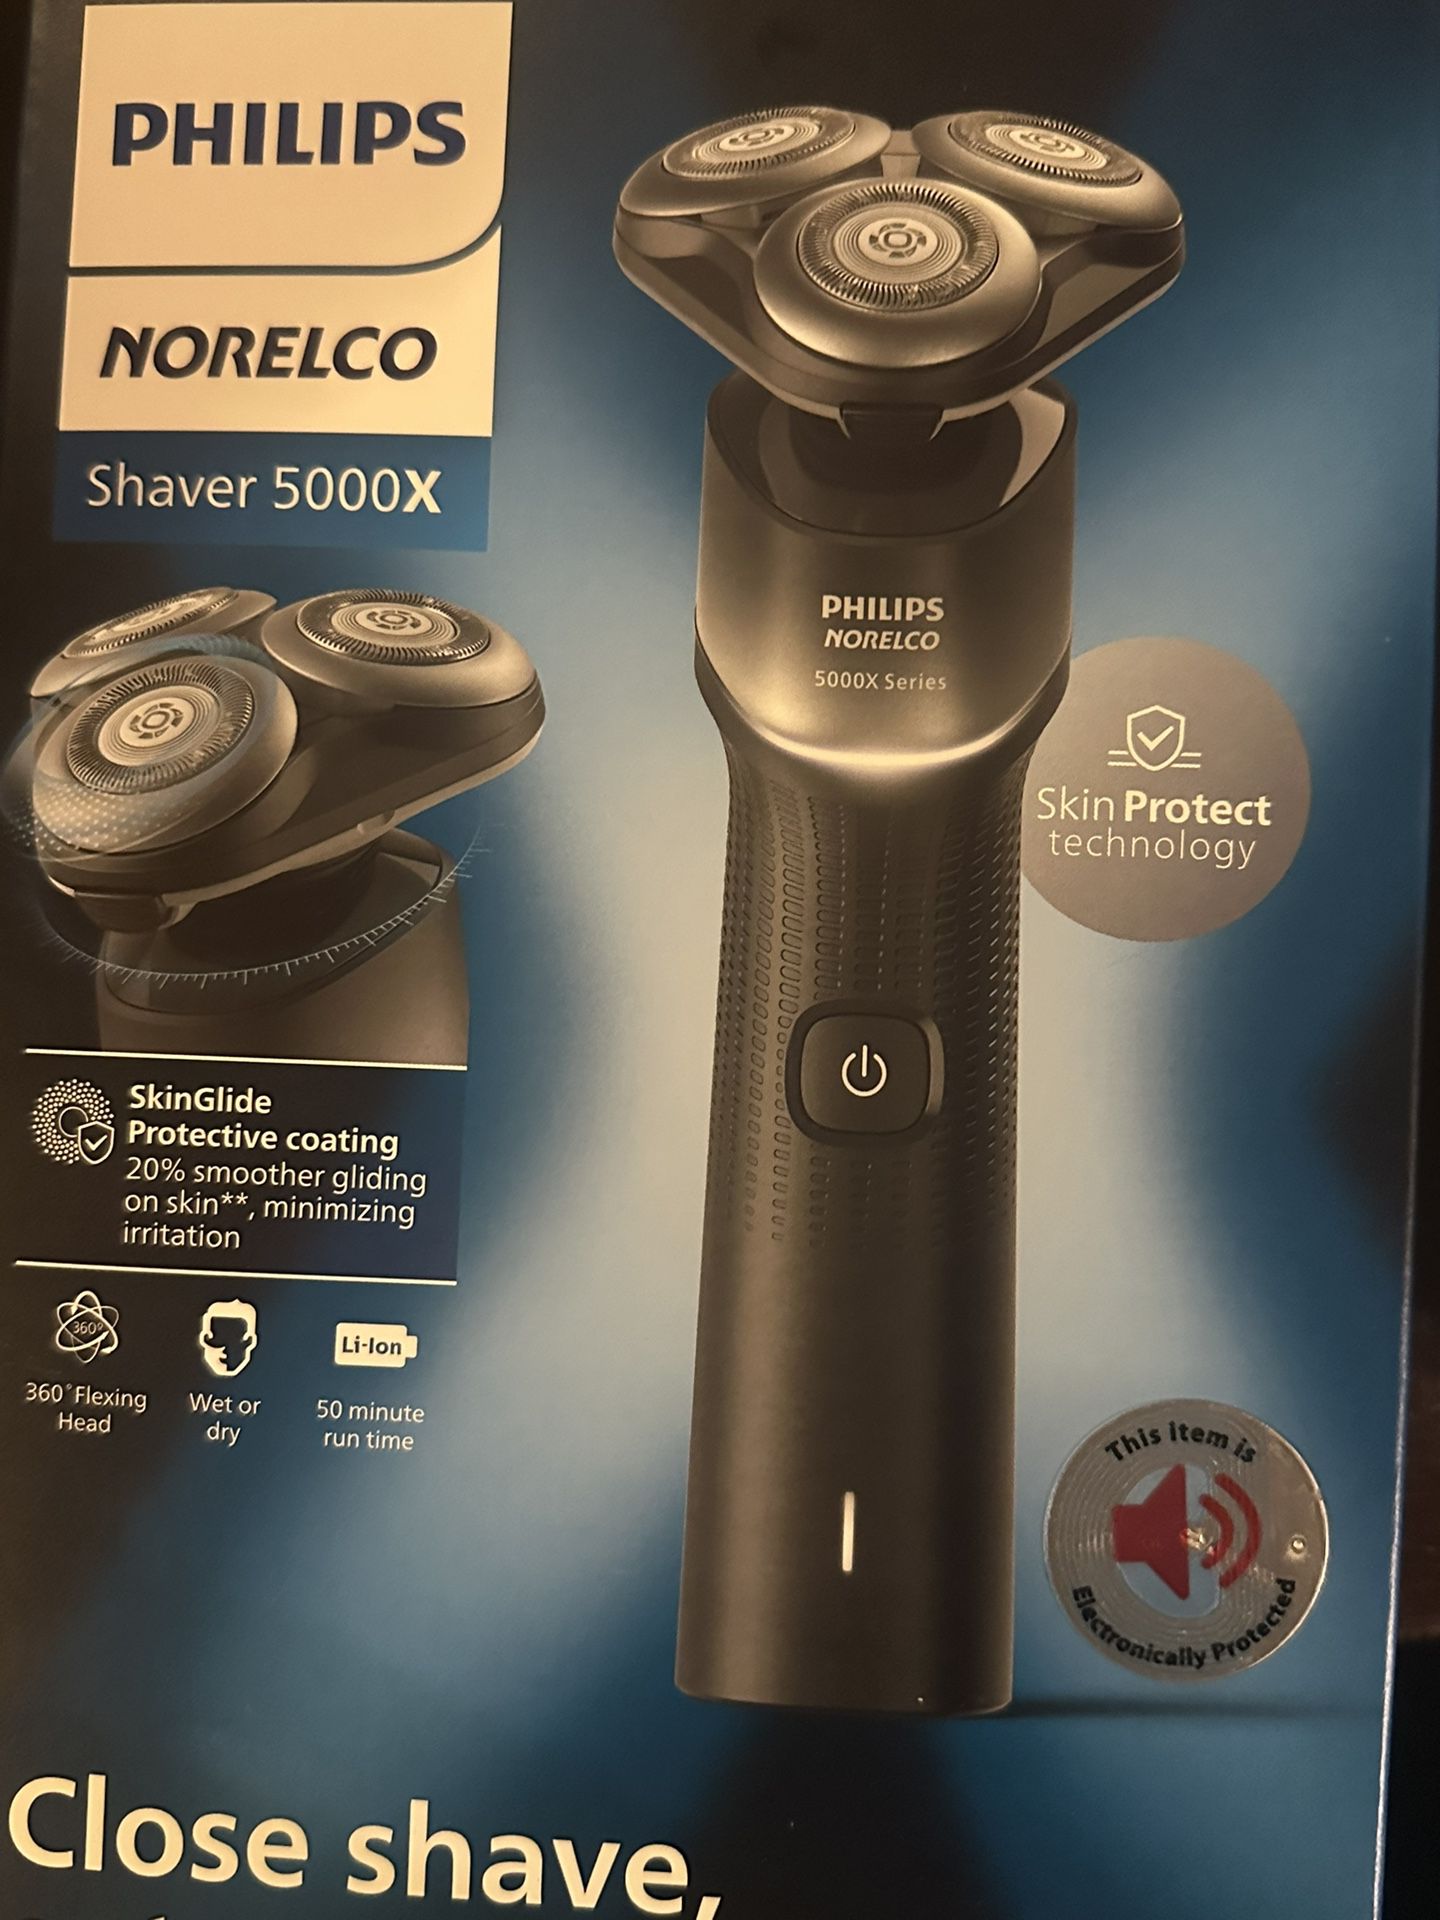 Phillips Norelco Shaver 5000